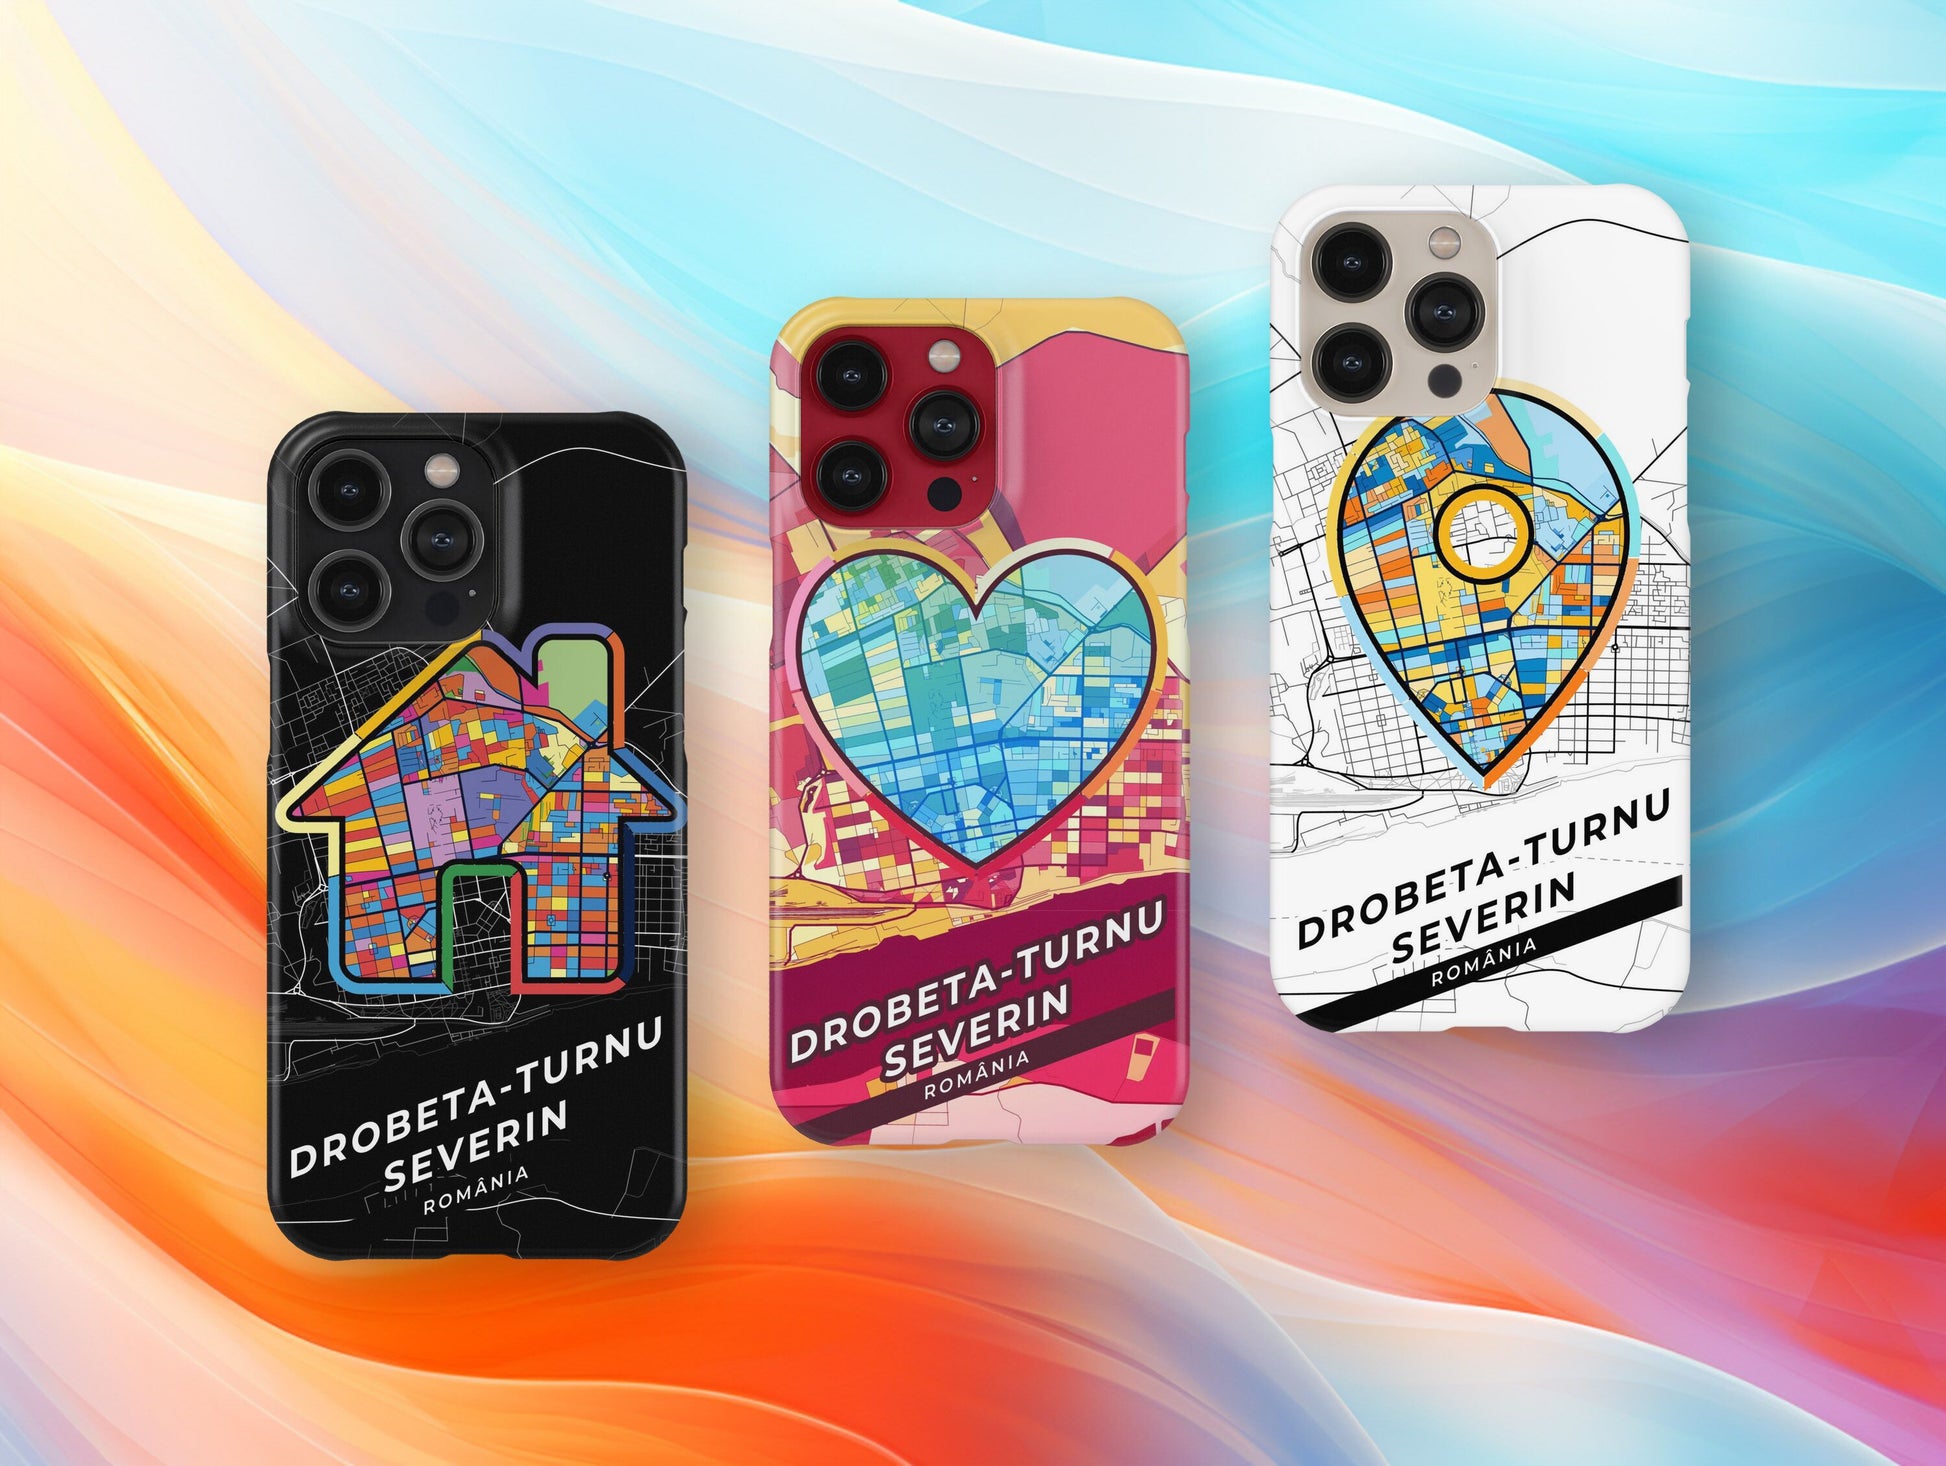 Drobeta-Turnu Severin Romania slim phone case with colorful icon. Birthday, wedding or housewarming gift. Couple match cases.